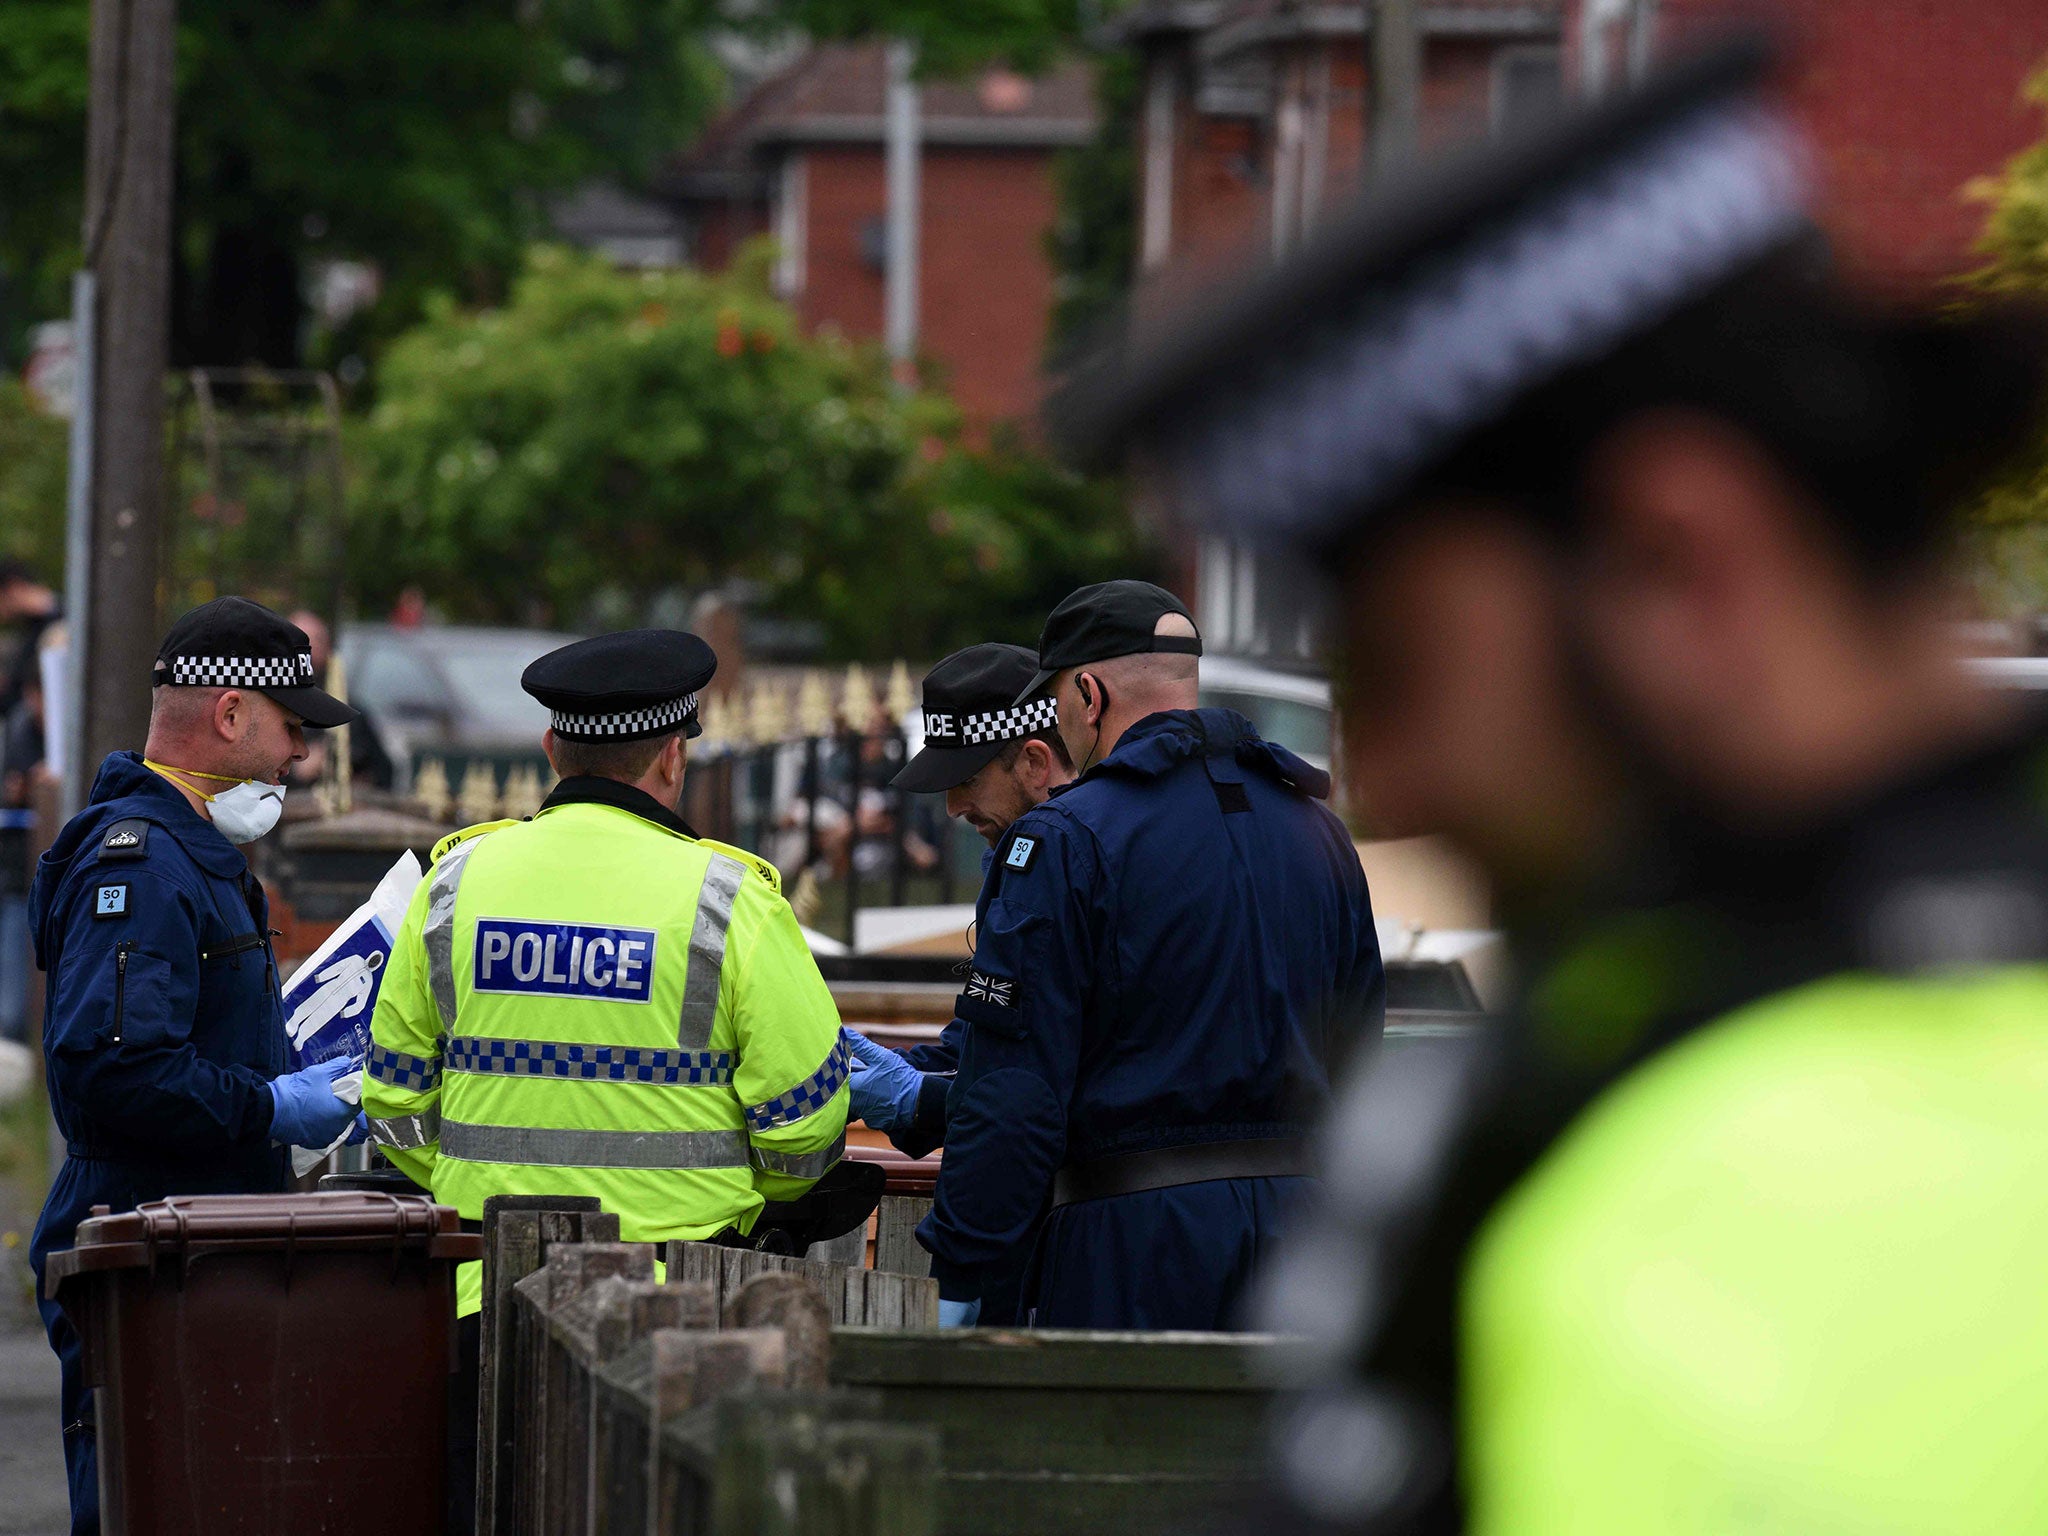 Police officers arrive at a residential property on Elsmore Road in Fallowfield, Manchester, on May 24, 2017,